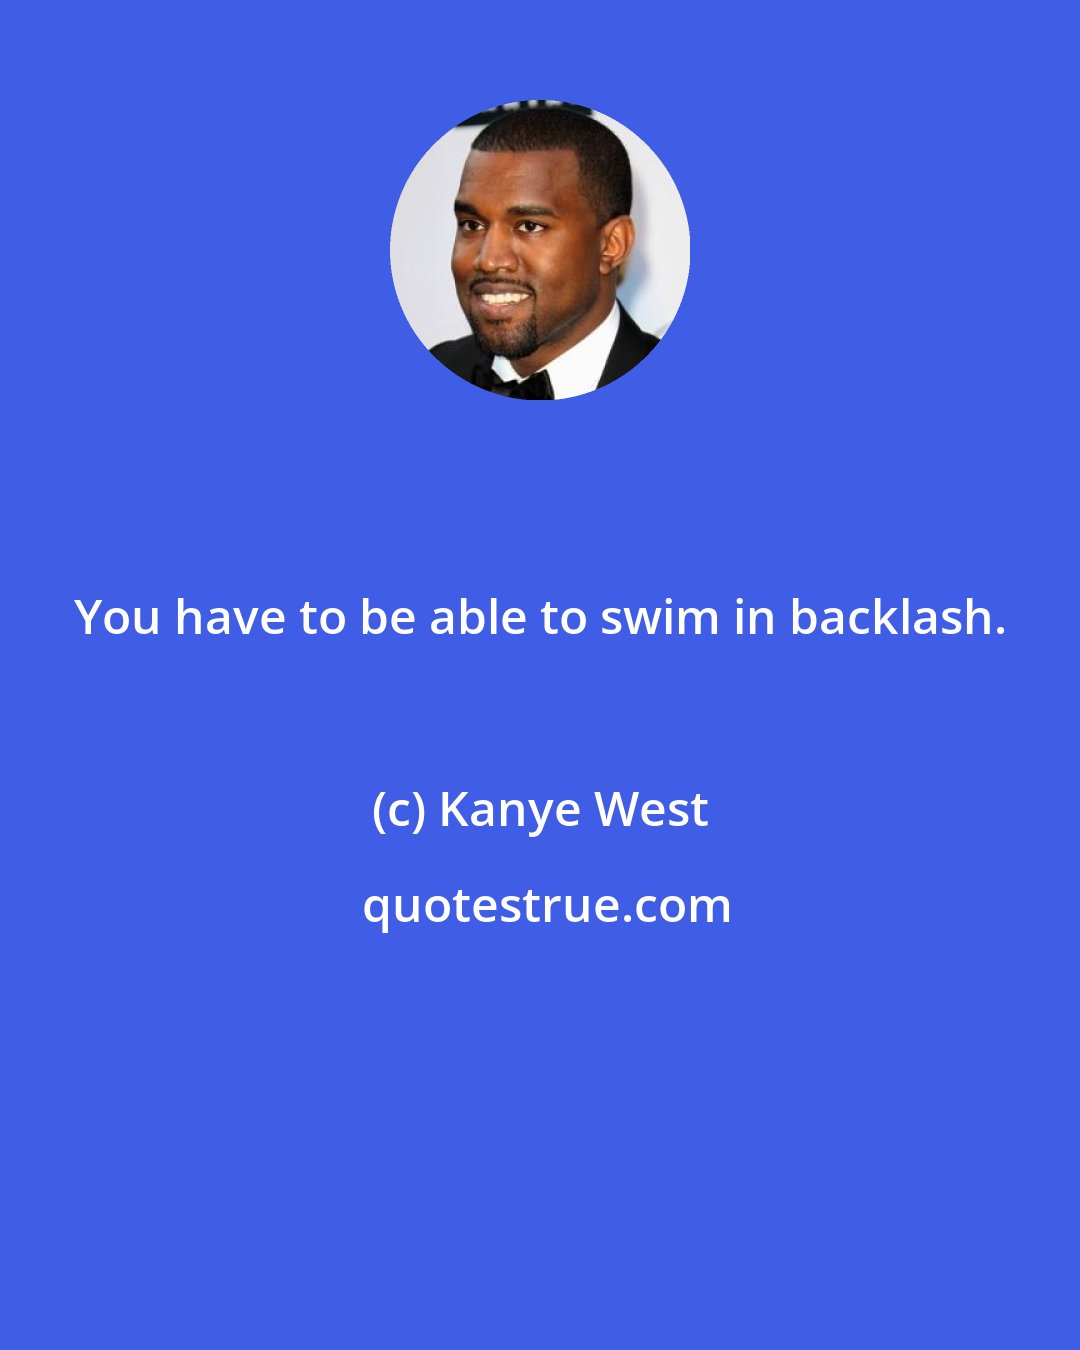 Kanye West: You have to be able to swim in backlash.